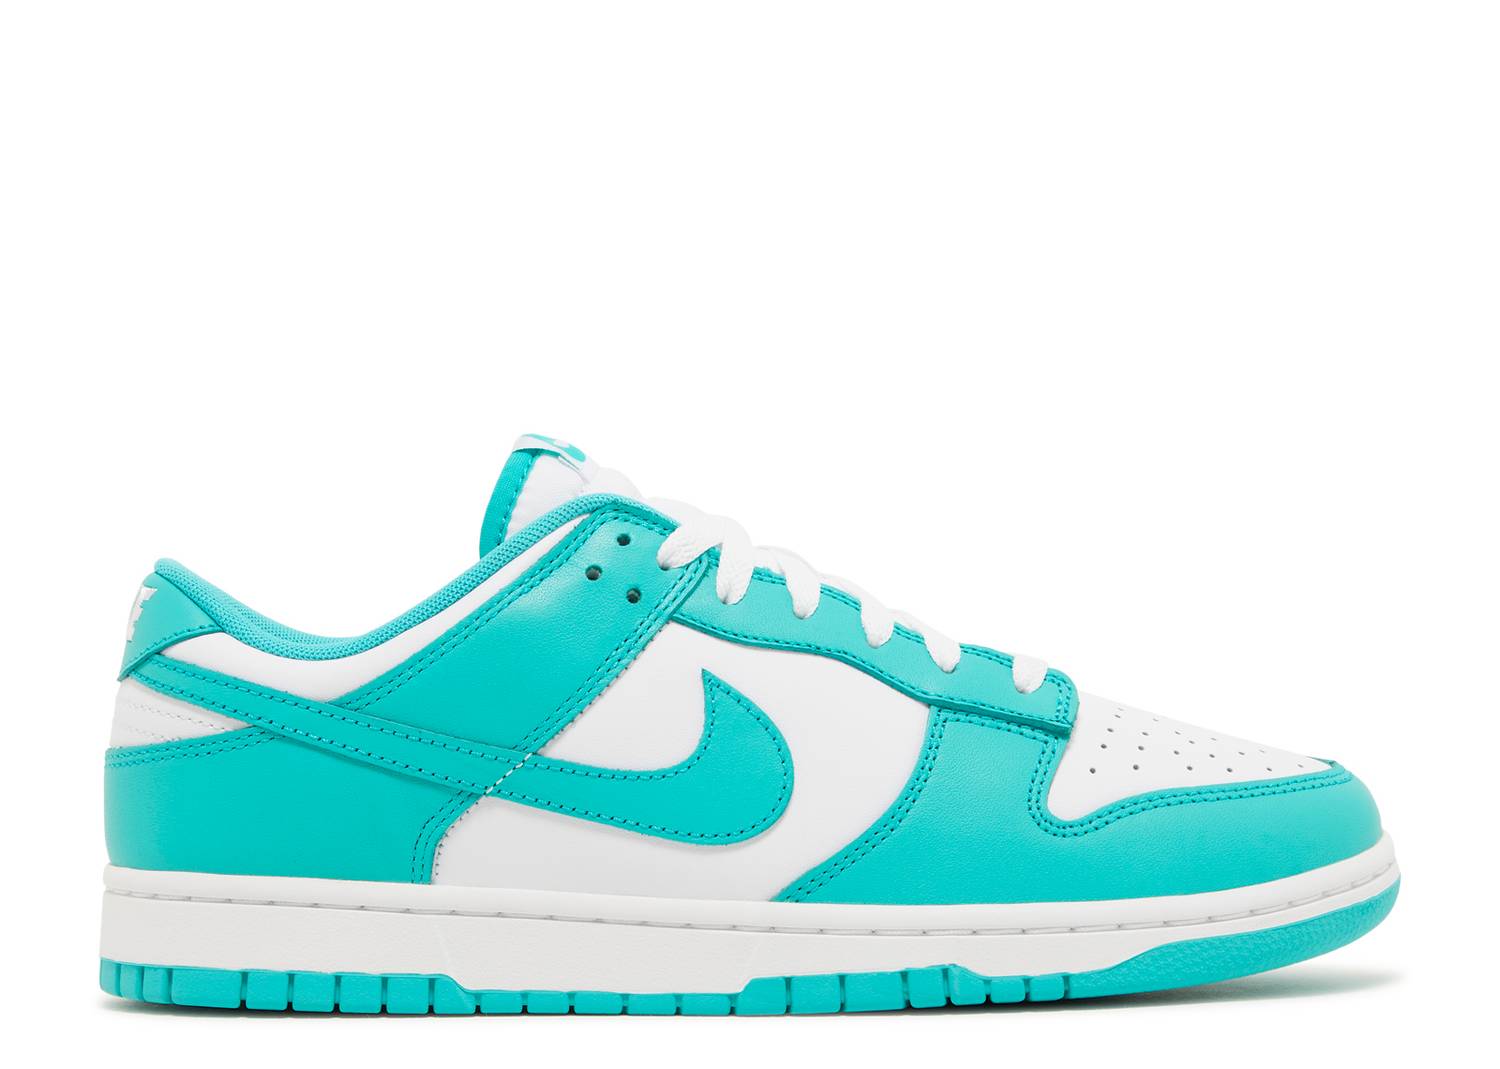 NIKE DUNK LOW “CLEAR JADE”